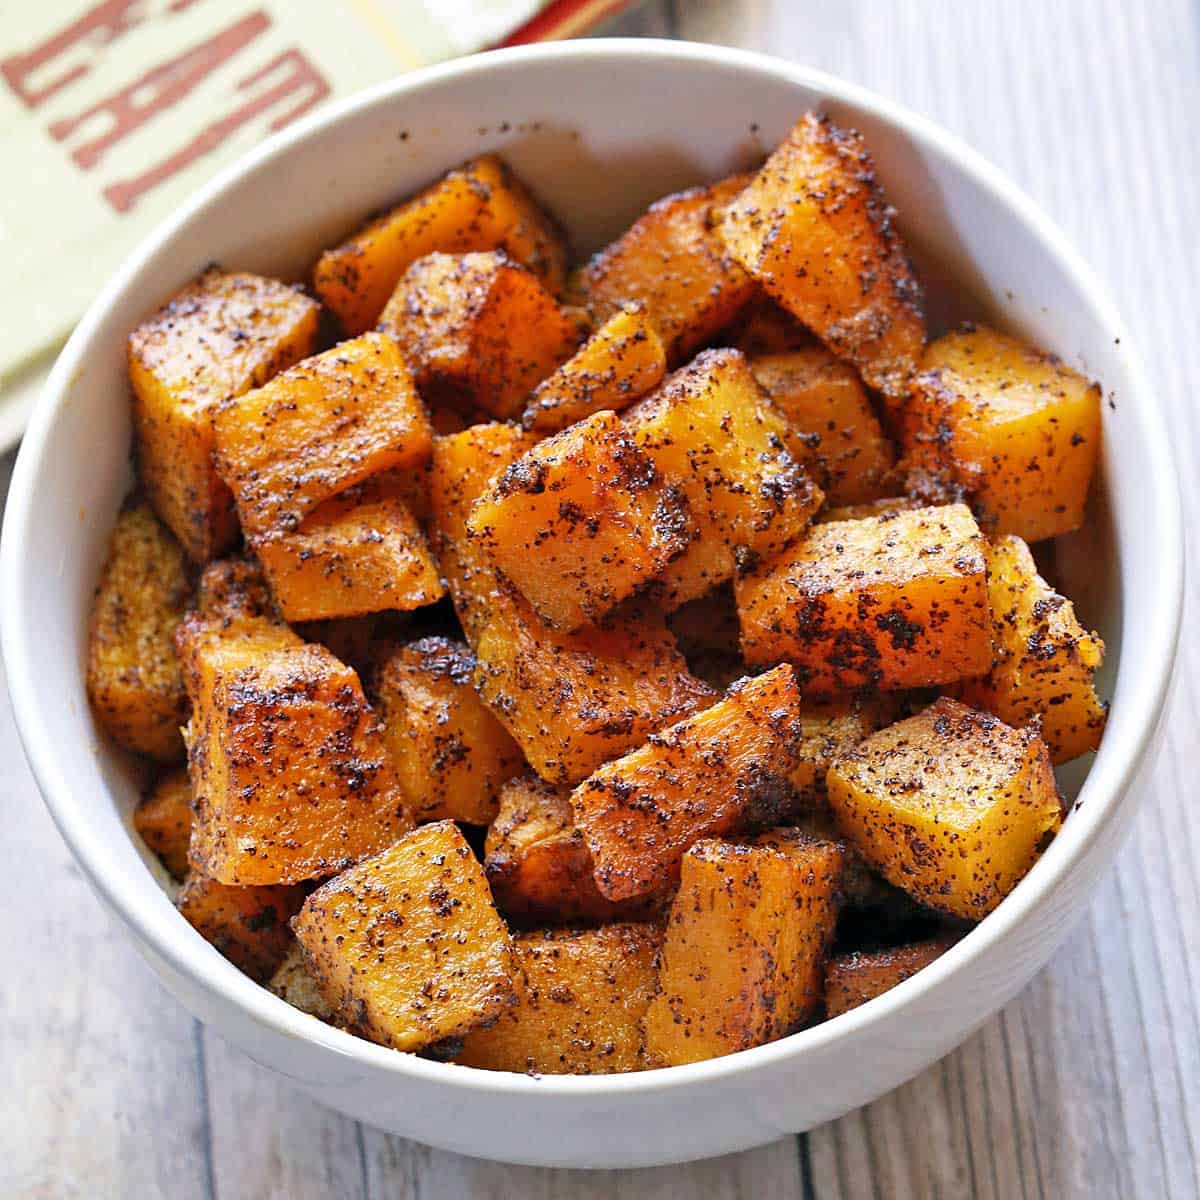 4- Ingredient Oven-Roasted Butternut Squash - Healthy Fitness Meals